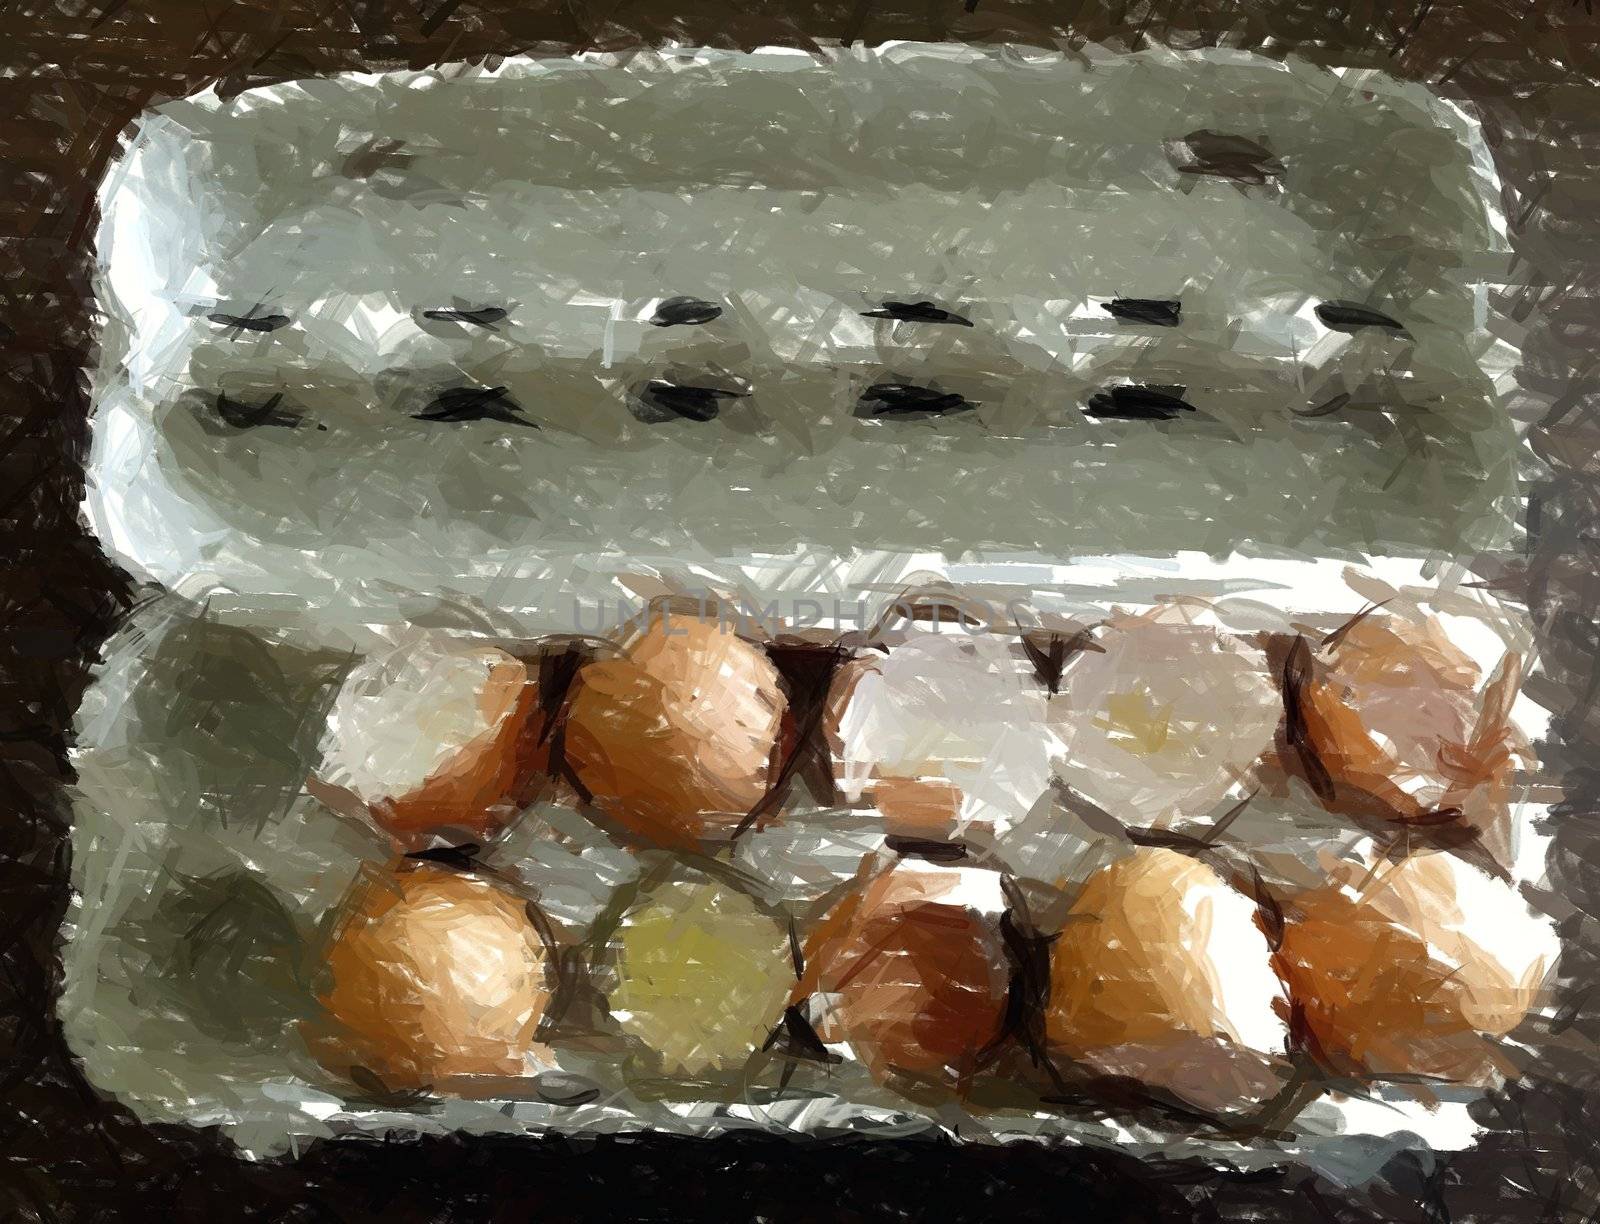 Painting of some eggs in their carton.